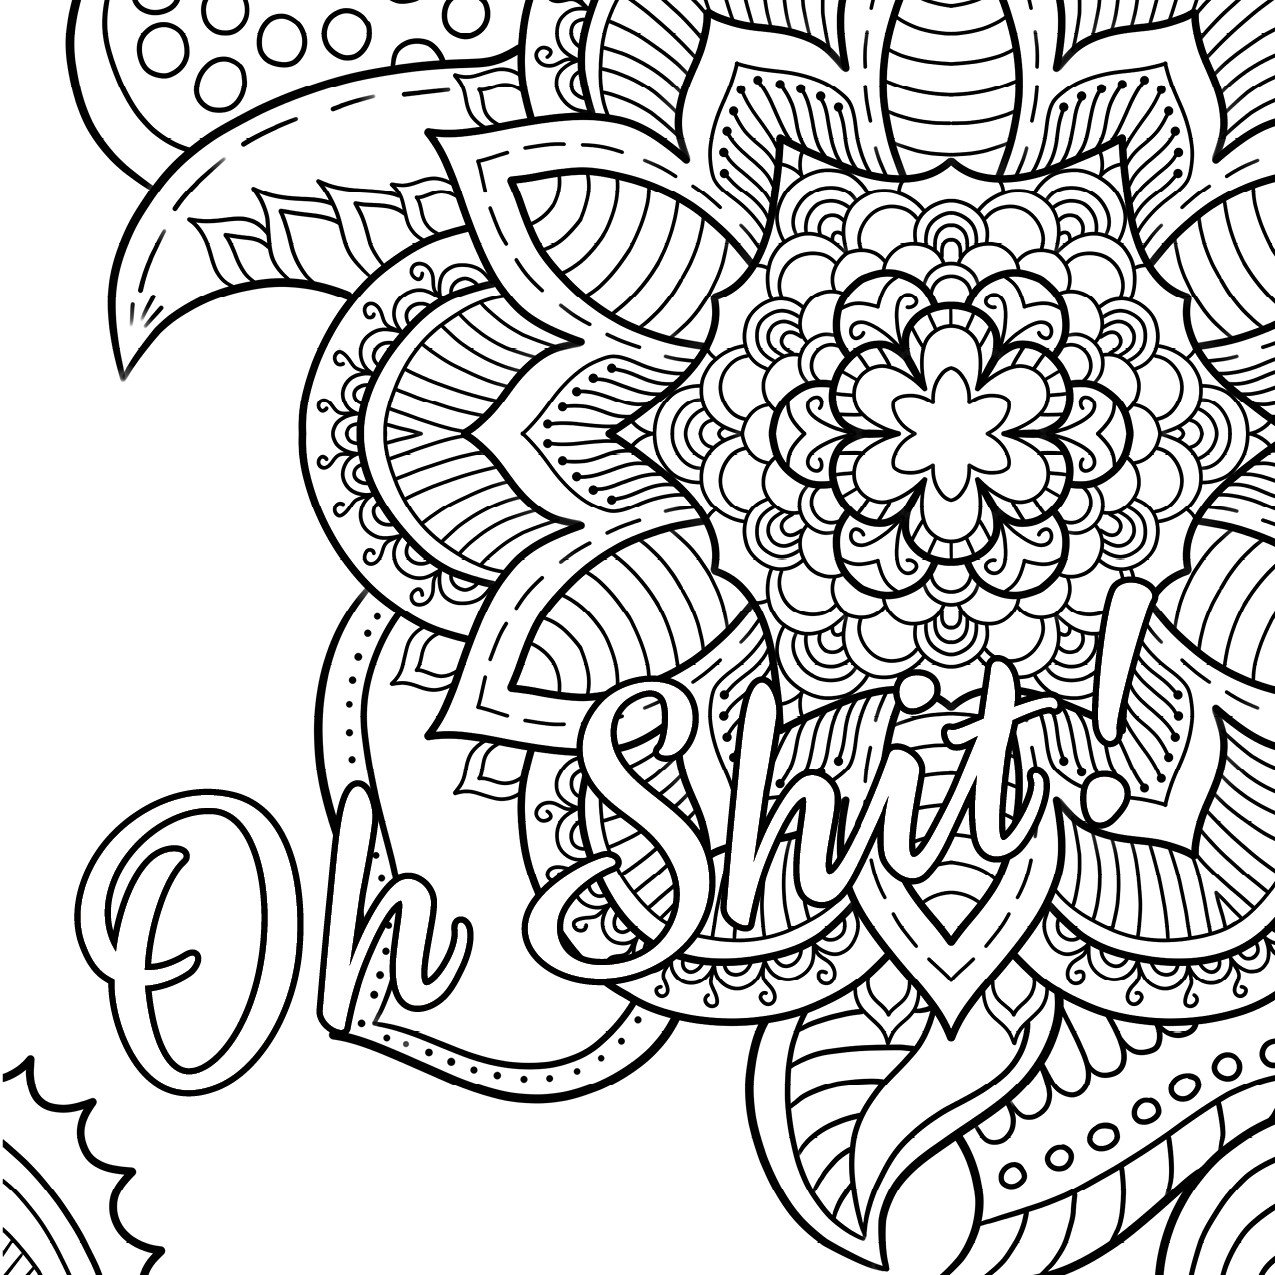 Stress Relief Coloring Pages For Boys
 Oh Shit Free Coloring Page Swear Word Coloring Book